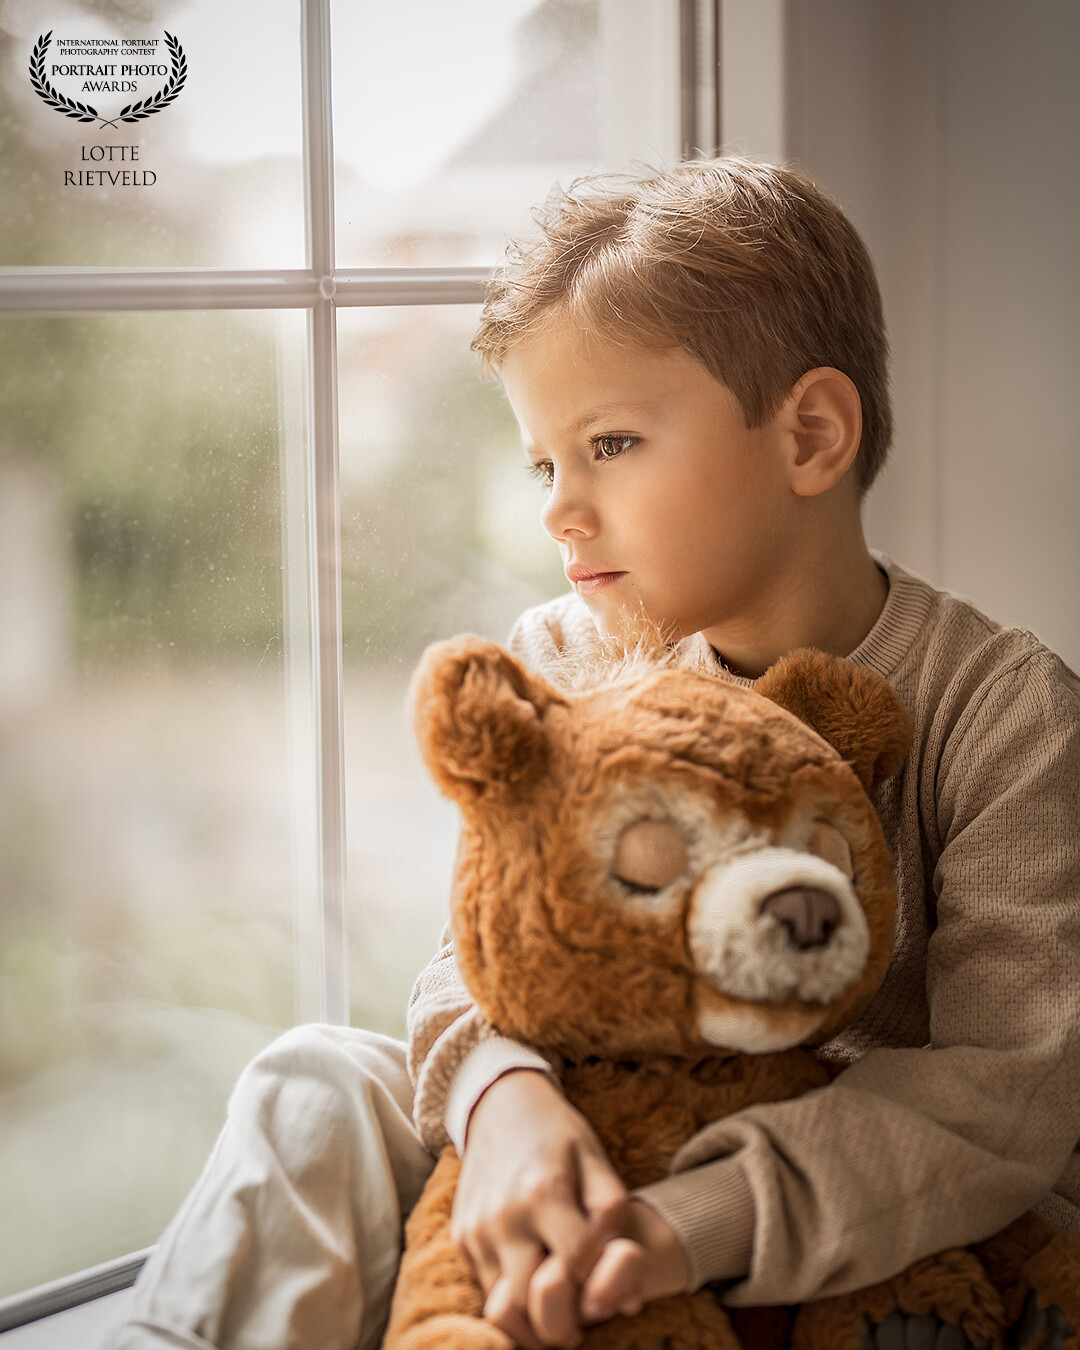 "A Little Dreamer" captures the wonder of youth, as seen in the dreamy gaze of the boy. The soft daylight lends a beautiful atmosphere to the photo.